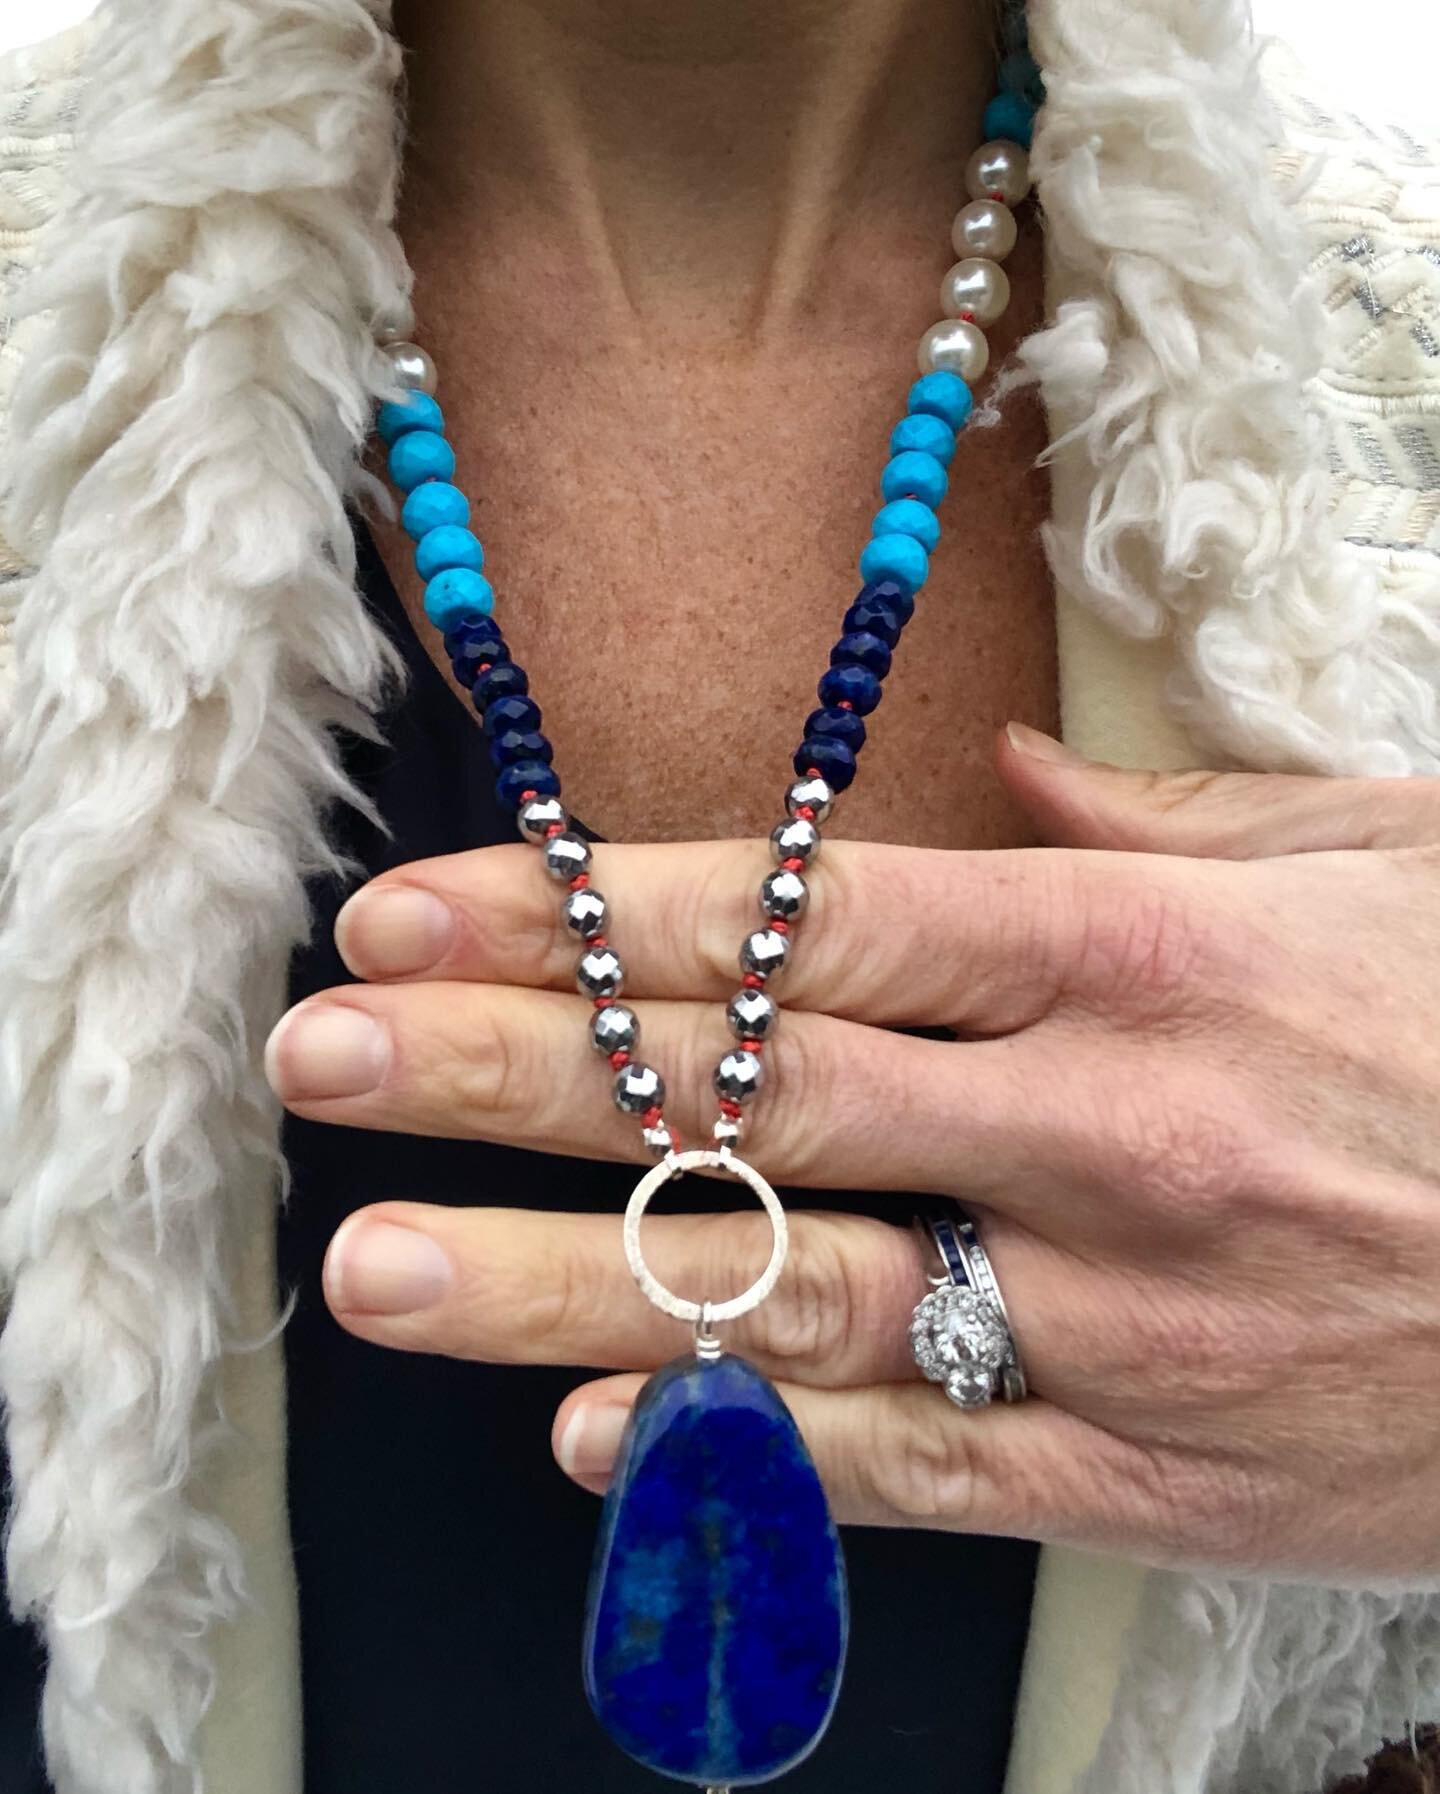 There&rsquo;s no feeling blue when you wear these hues!

This long Lapis beauty is accented with pink silk thread that is individually knotted between each Turquoise, Lapis, and Pearl (synthetic) stones.  Sterling silver accents and components add so